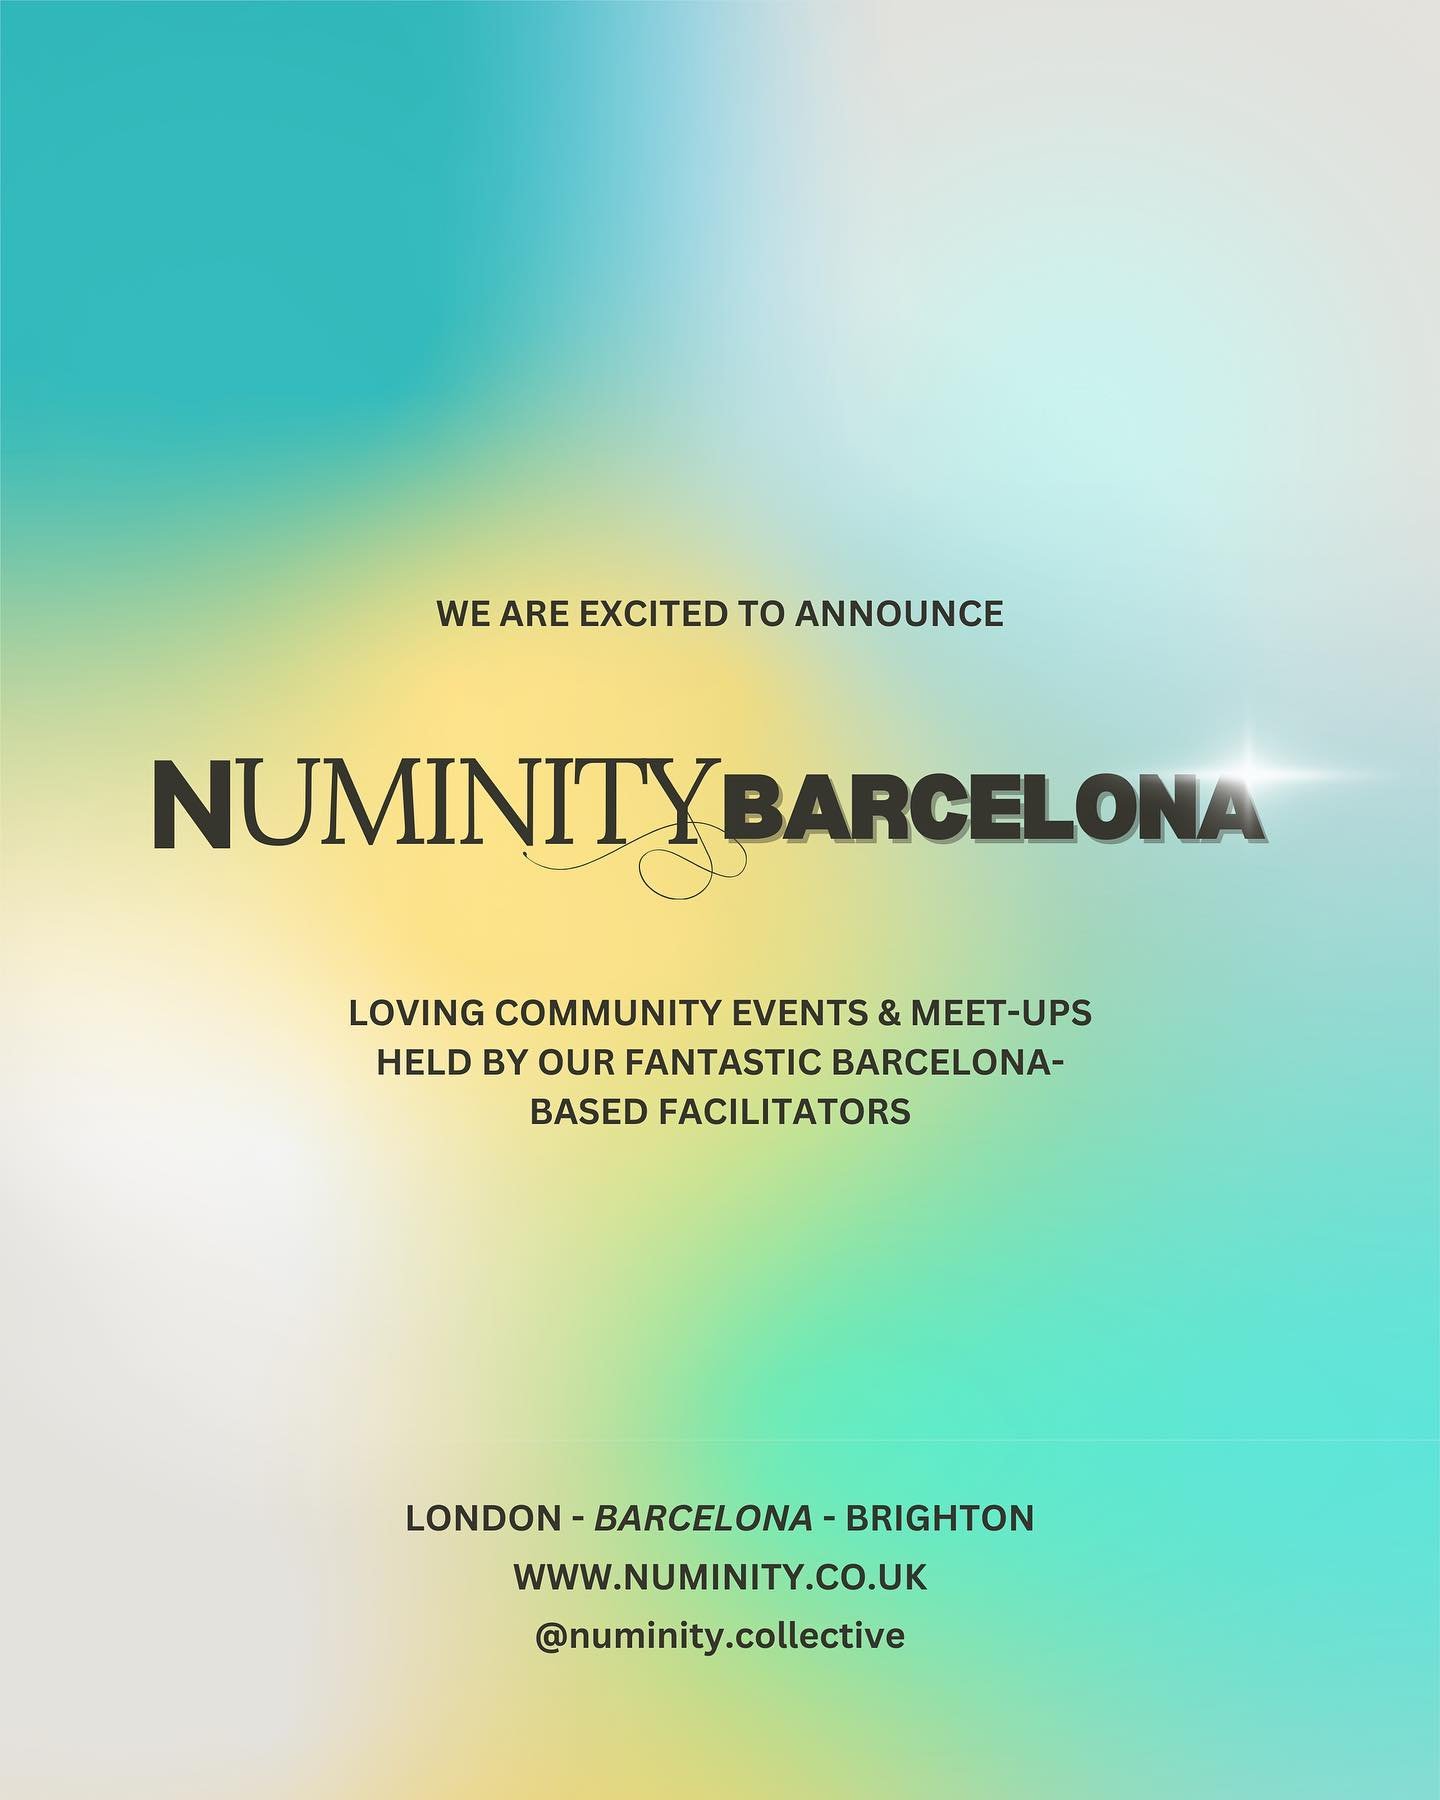 🤩INTRODUCING Numinity Barcelona! 

We are so excited to announce that we will now be hosting events and meet-ups in the vibrant city of Barcelona with two of our wonderful facilitators Jen &amp; Huw💫

Make sure to book via the link and spread the w